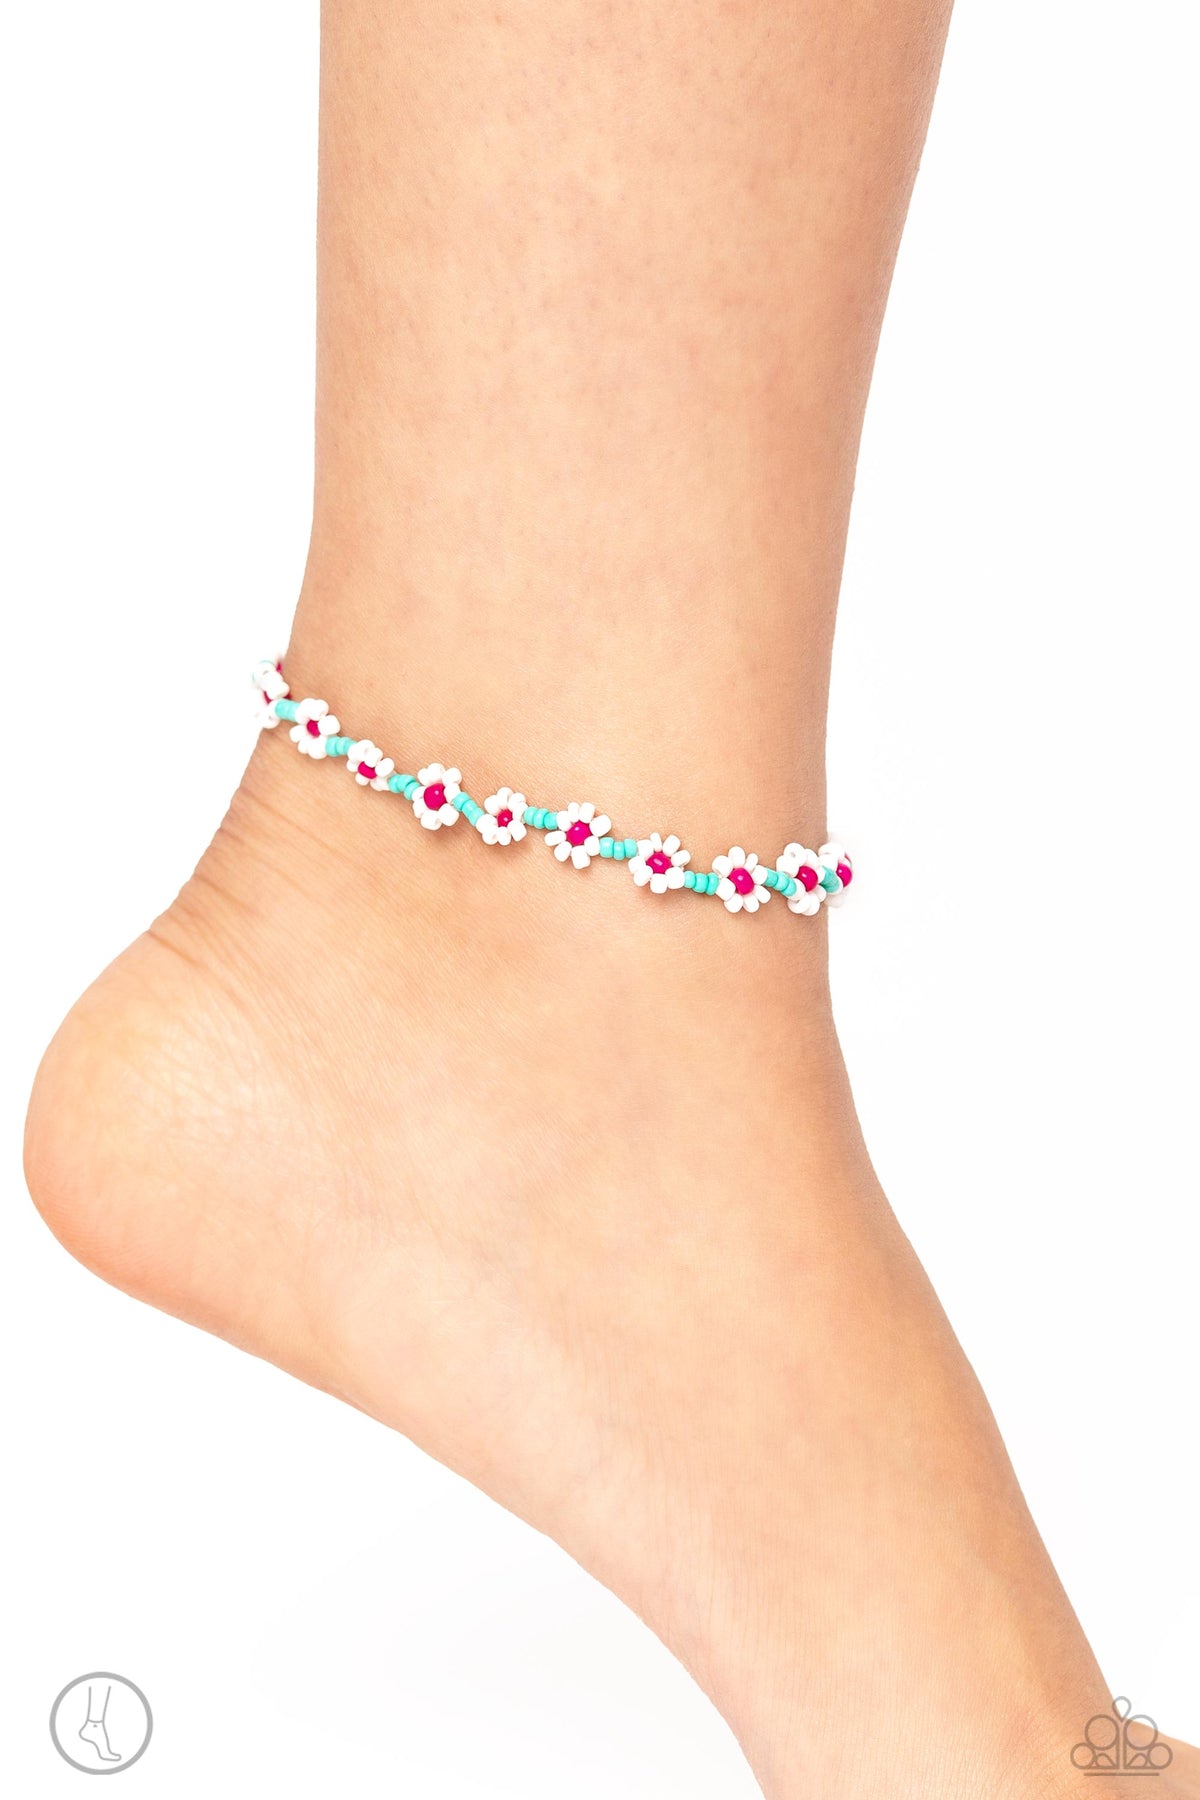 Midsummer Daisy Blue Seed Bead Flower Anklet - Paparazzi Accessories-on model - CarasShop.com - $5 Jewelry by Cara Jewels